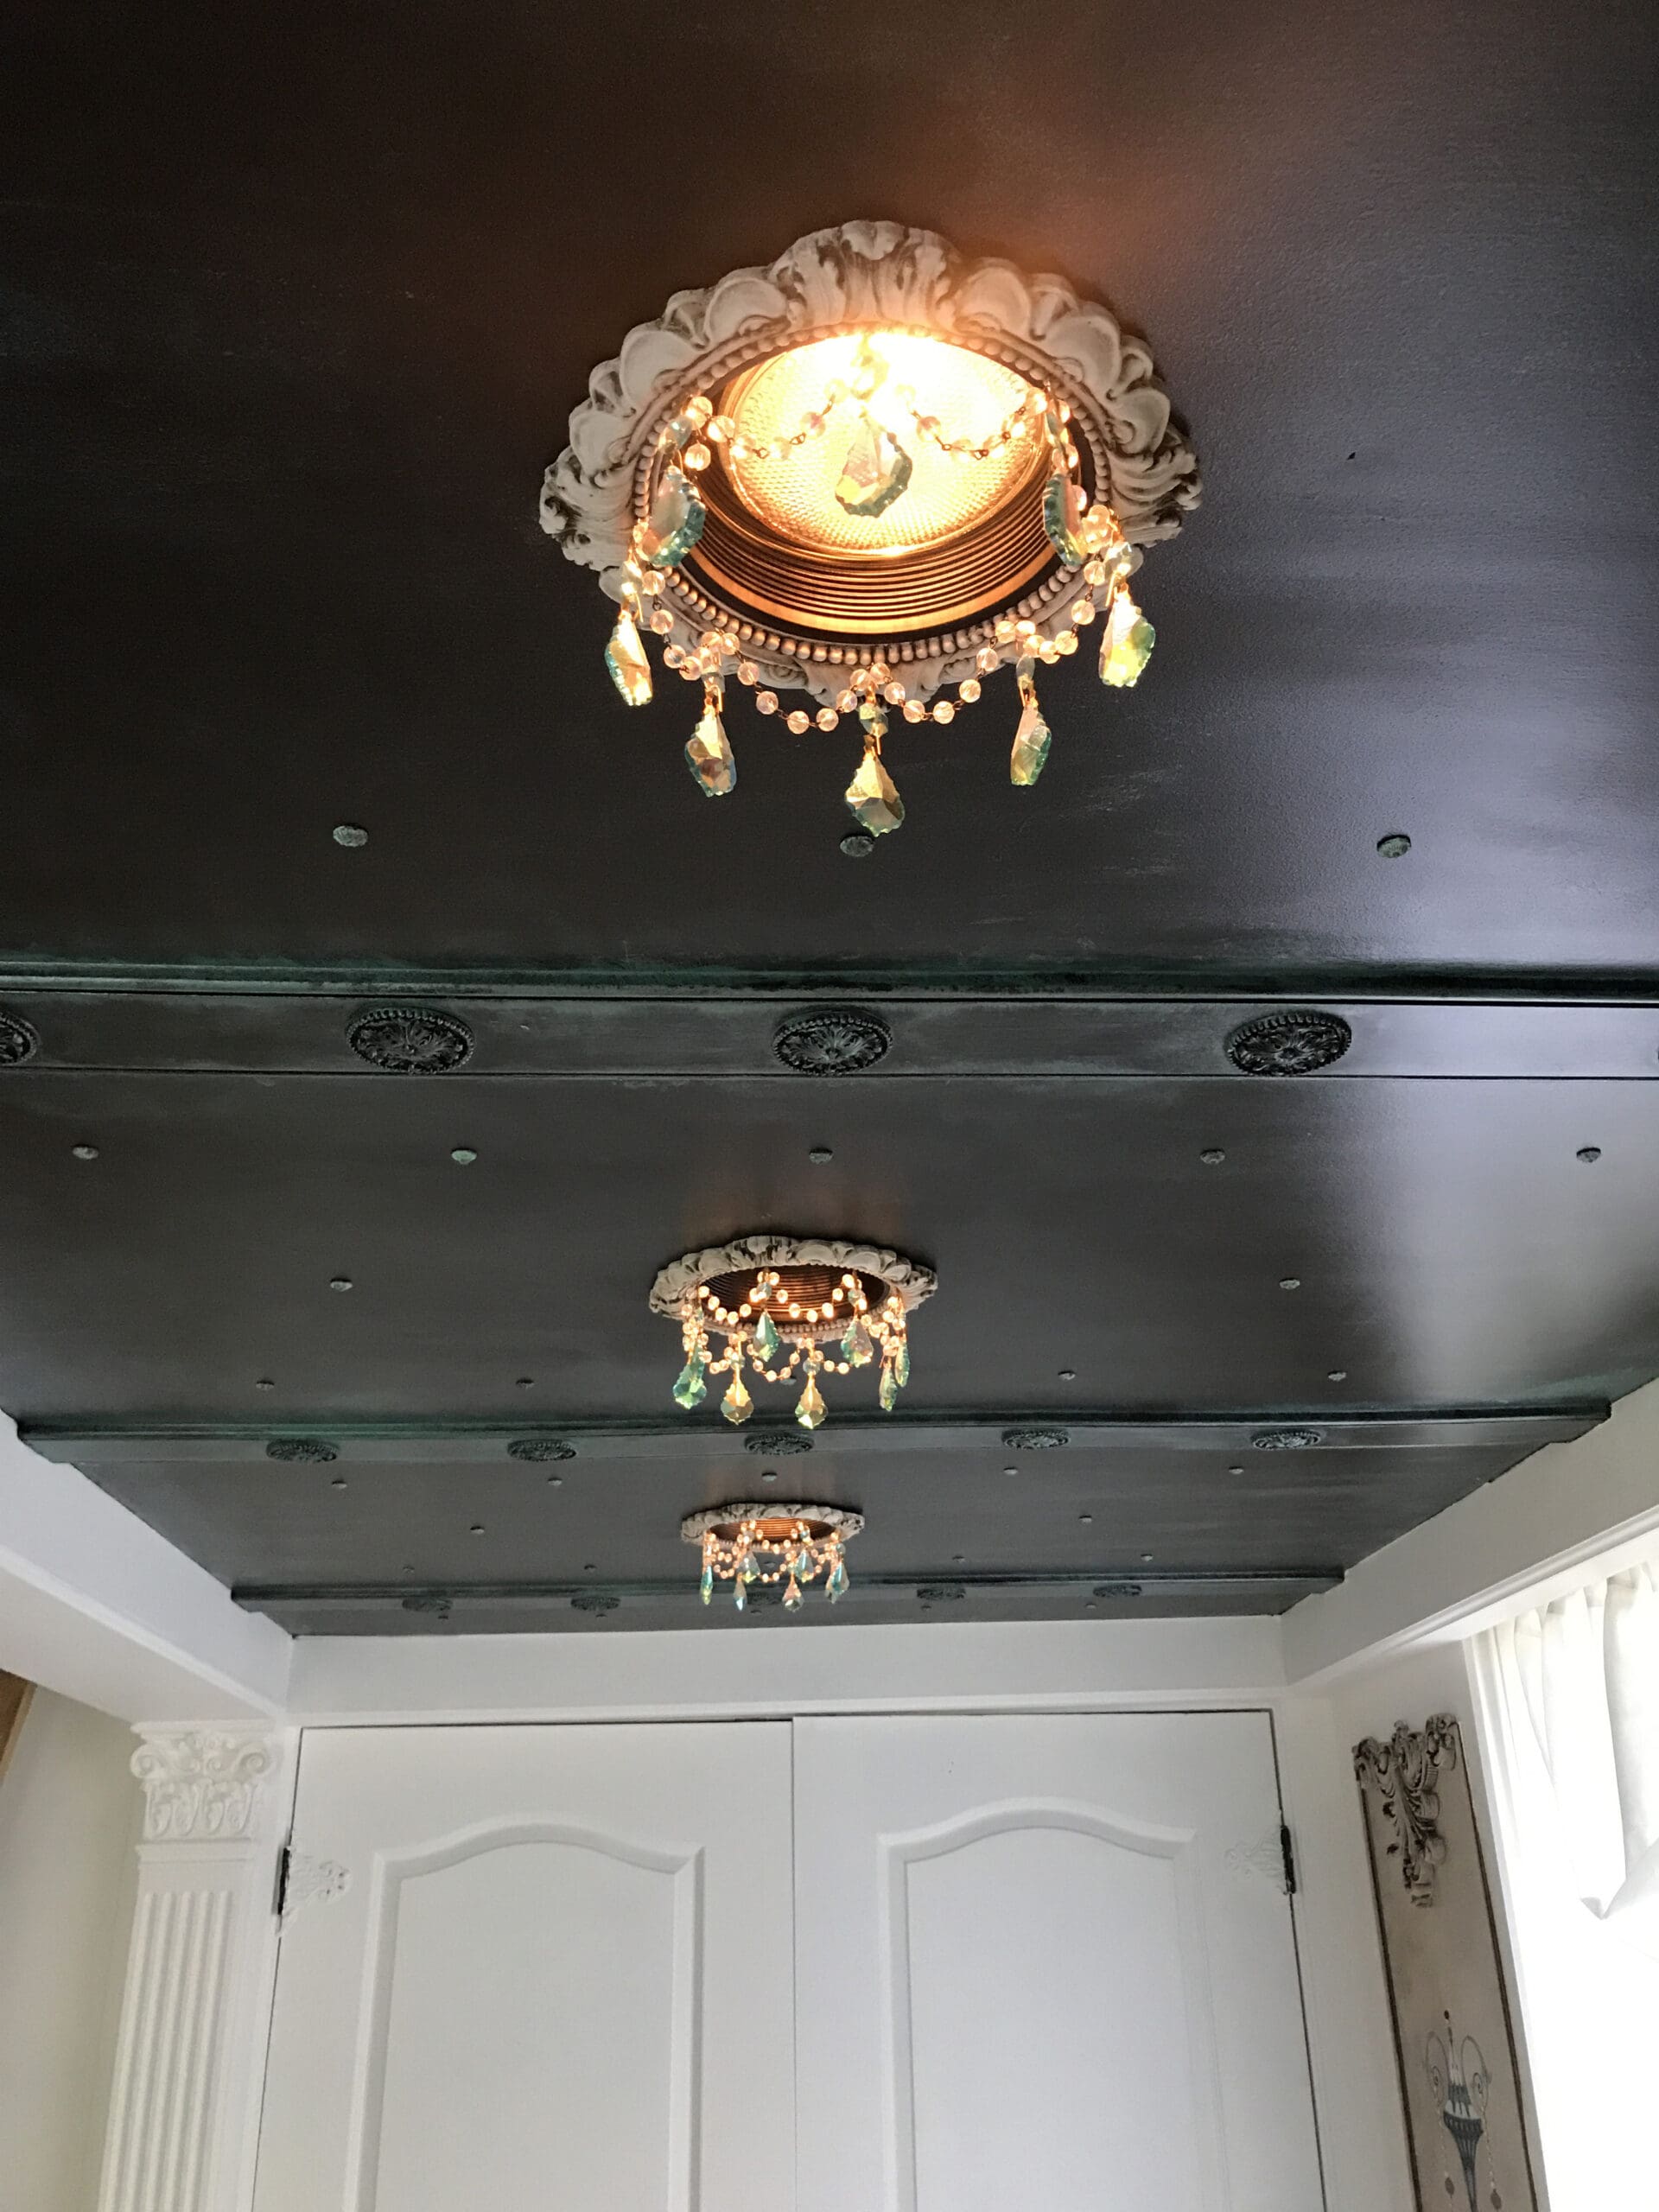 Recessed chandeliers add to the impact of a decorative ceiling.